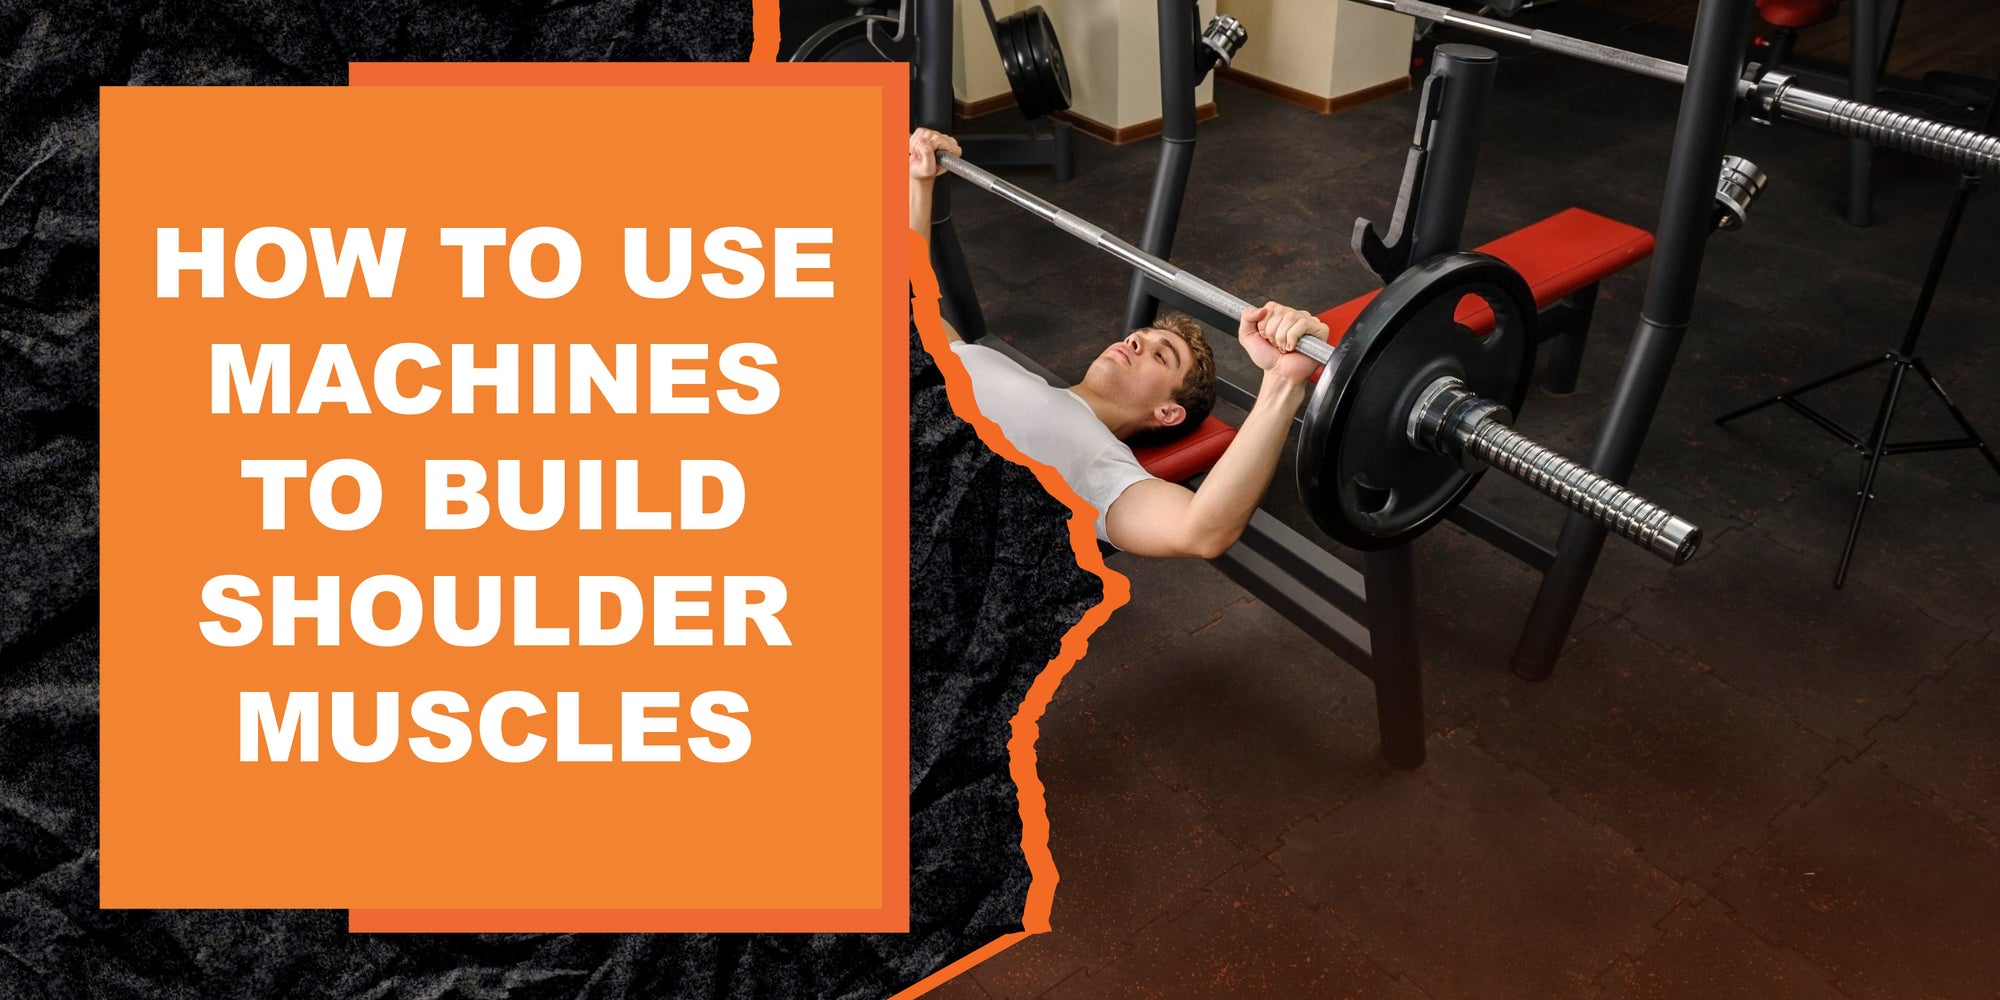 How to Use Machines to Build Shoulder Muscles